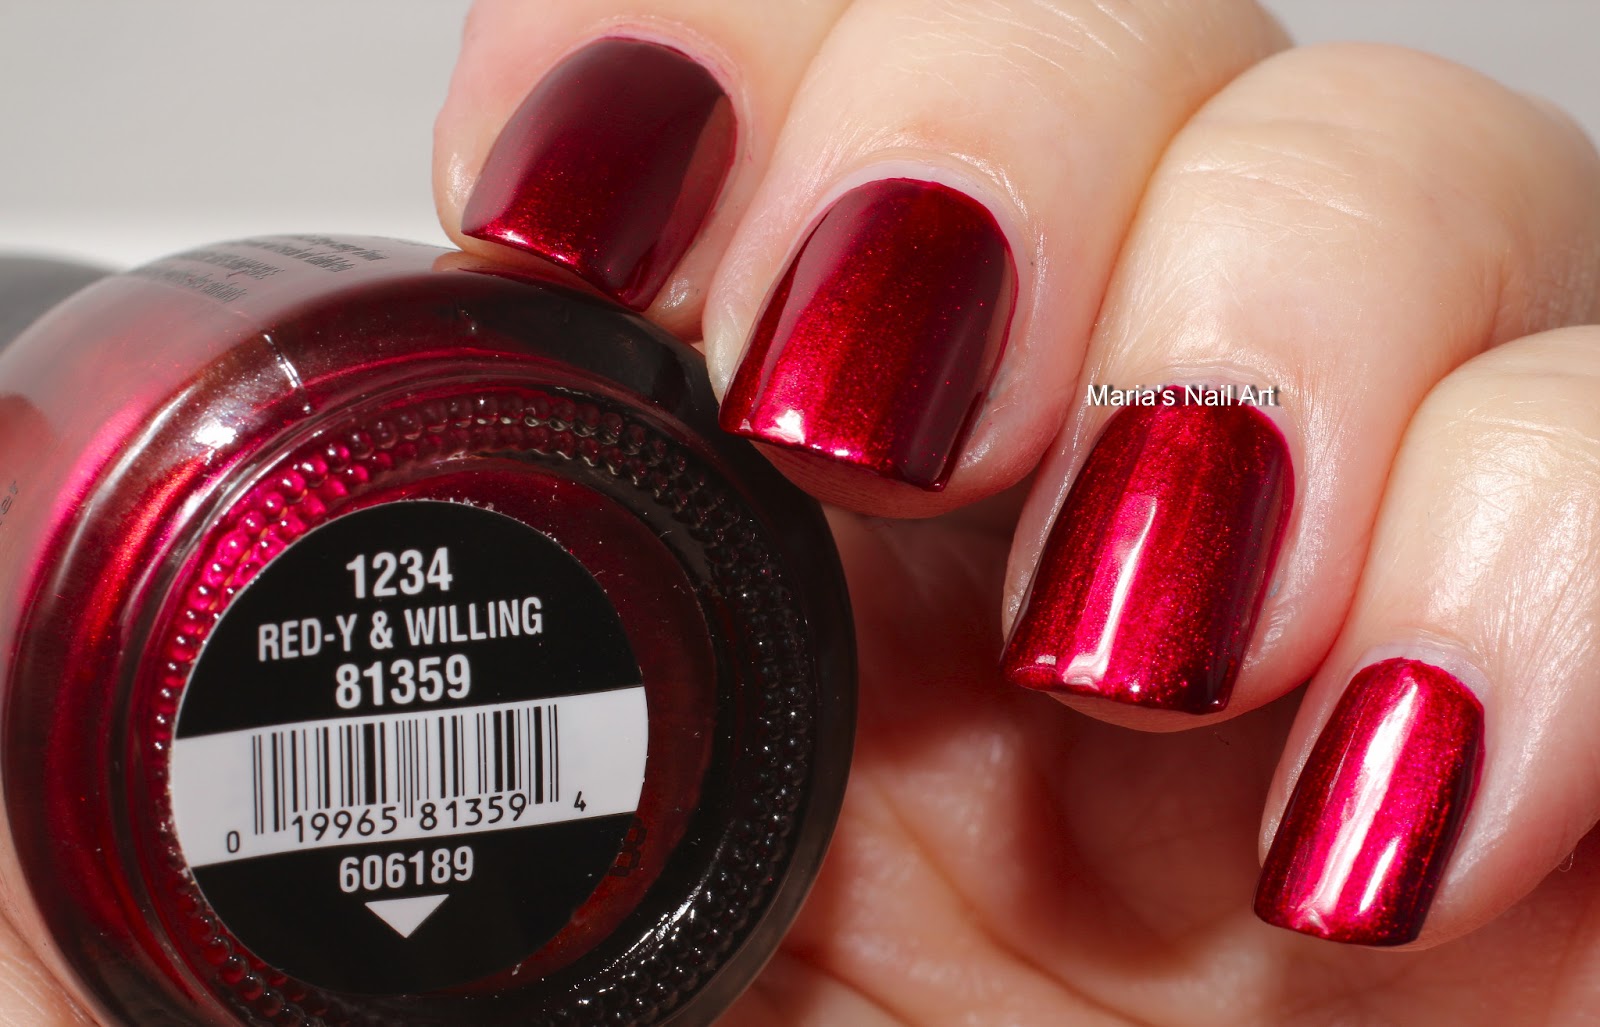 5. China Glaze Nail Lacquer in "Red-y & Willing" - wide 5